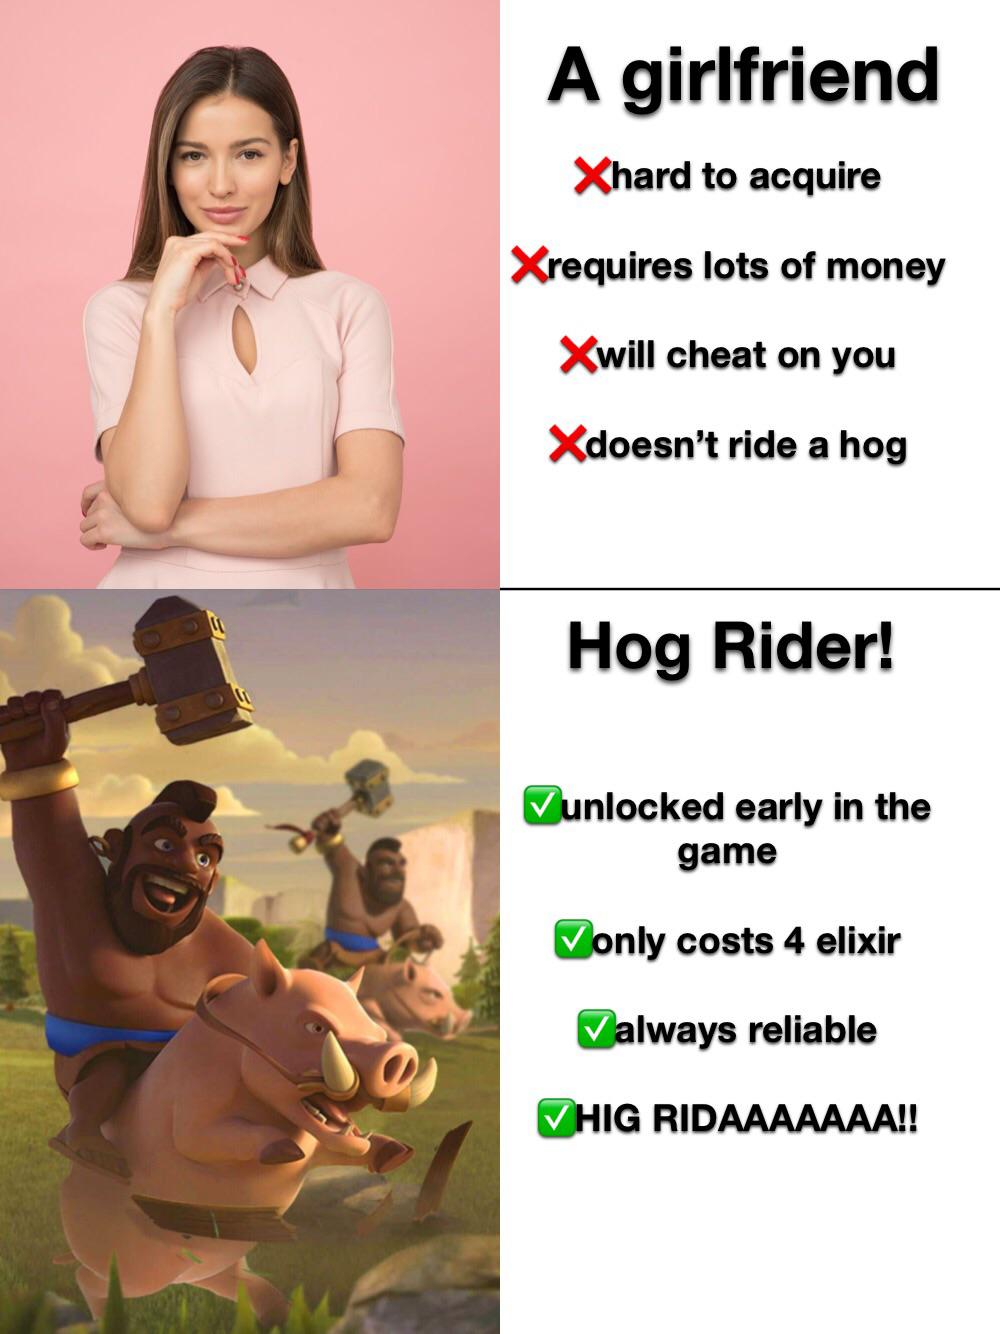 funny gaming memes - hog rider - A girlfriend Xhard to acquire Xrequires lots of money Xwill cheat on you Xdoesn't ride a hog Hog Rider! Dunlocked early in the game only costs 4 elixir Valways reliable Hig Ridaaaaaaa!!